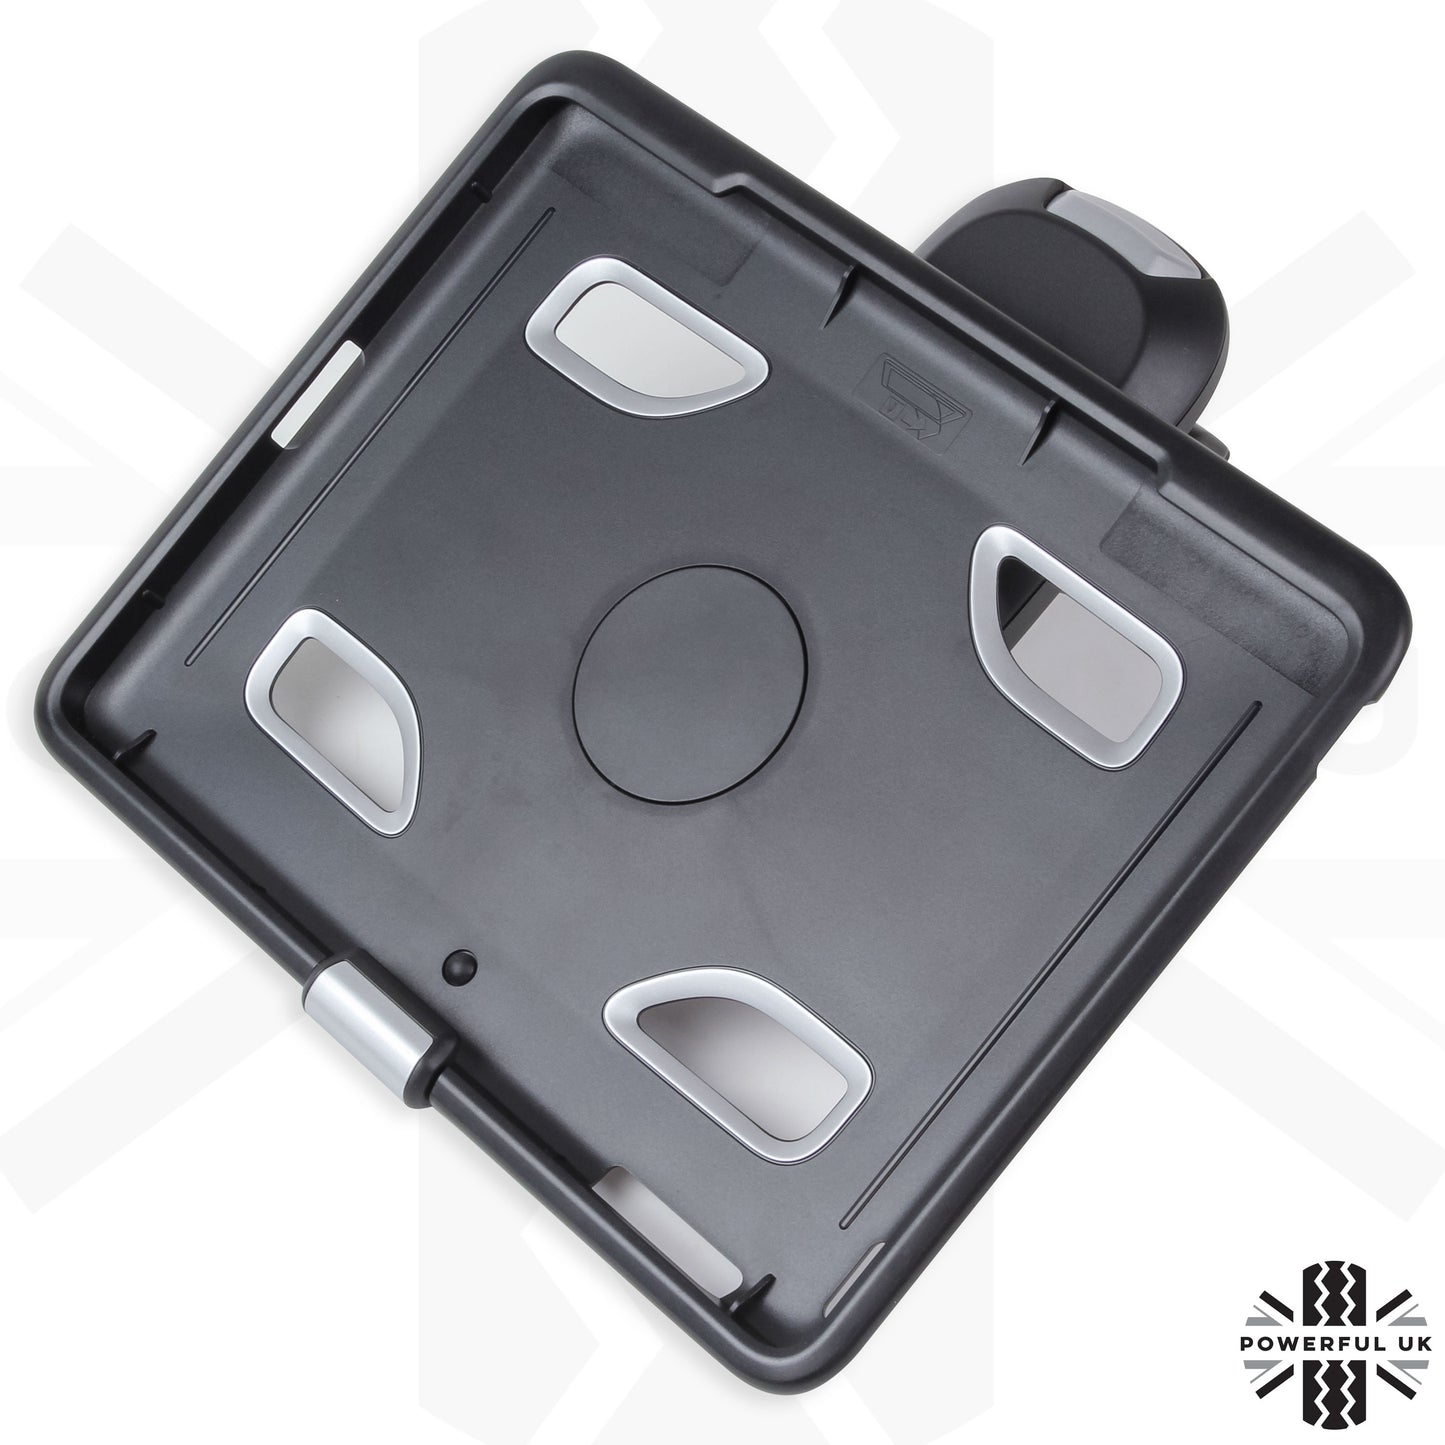 Click+Go iPad 2-4 Holder for Land Rover Discovery 4